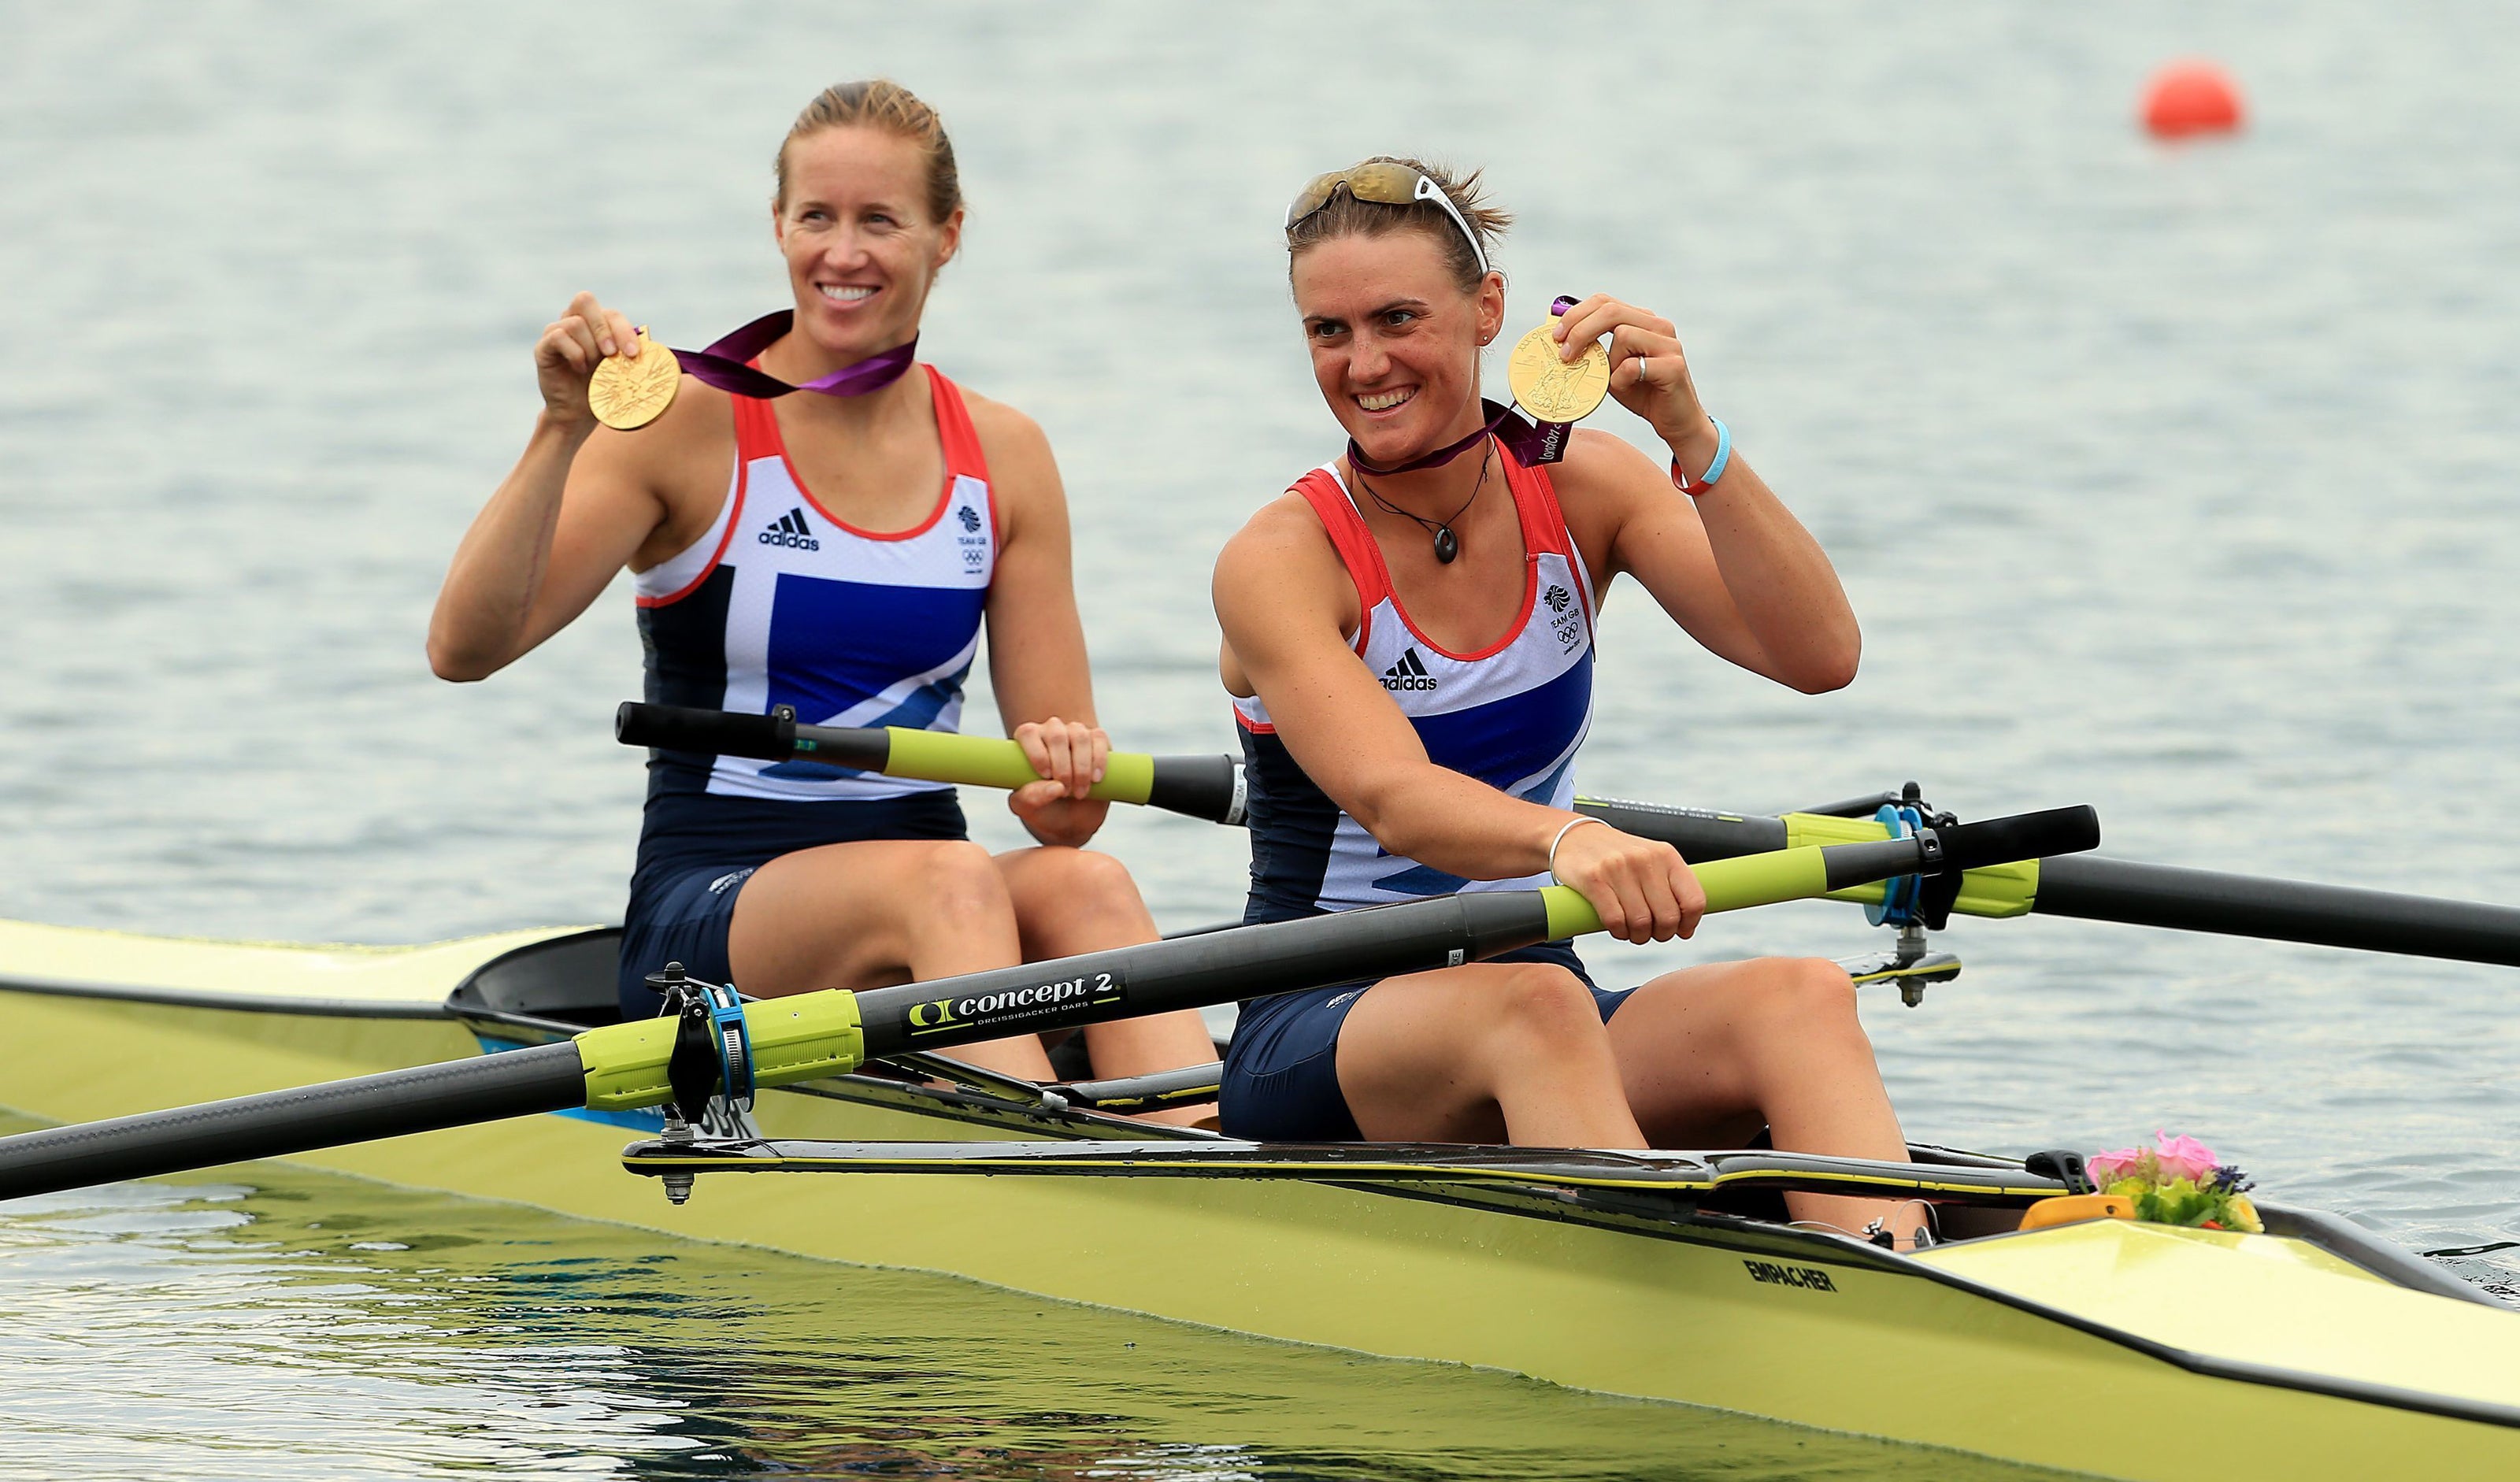 Team GB’s Helen Glover (L) and Heather Stanning after winning gold at the London 2012 Games (Stephen Pond/PA)